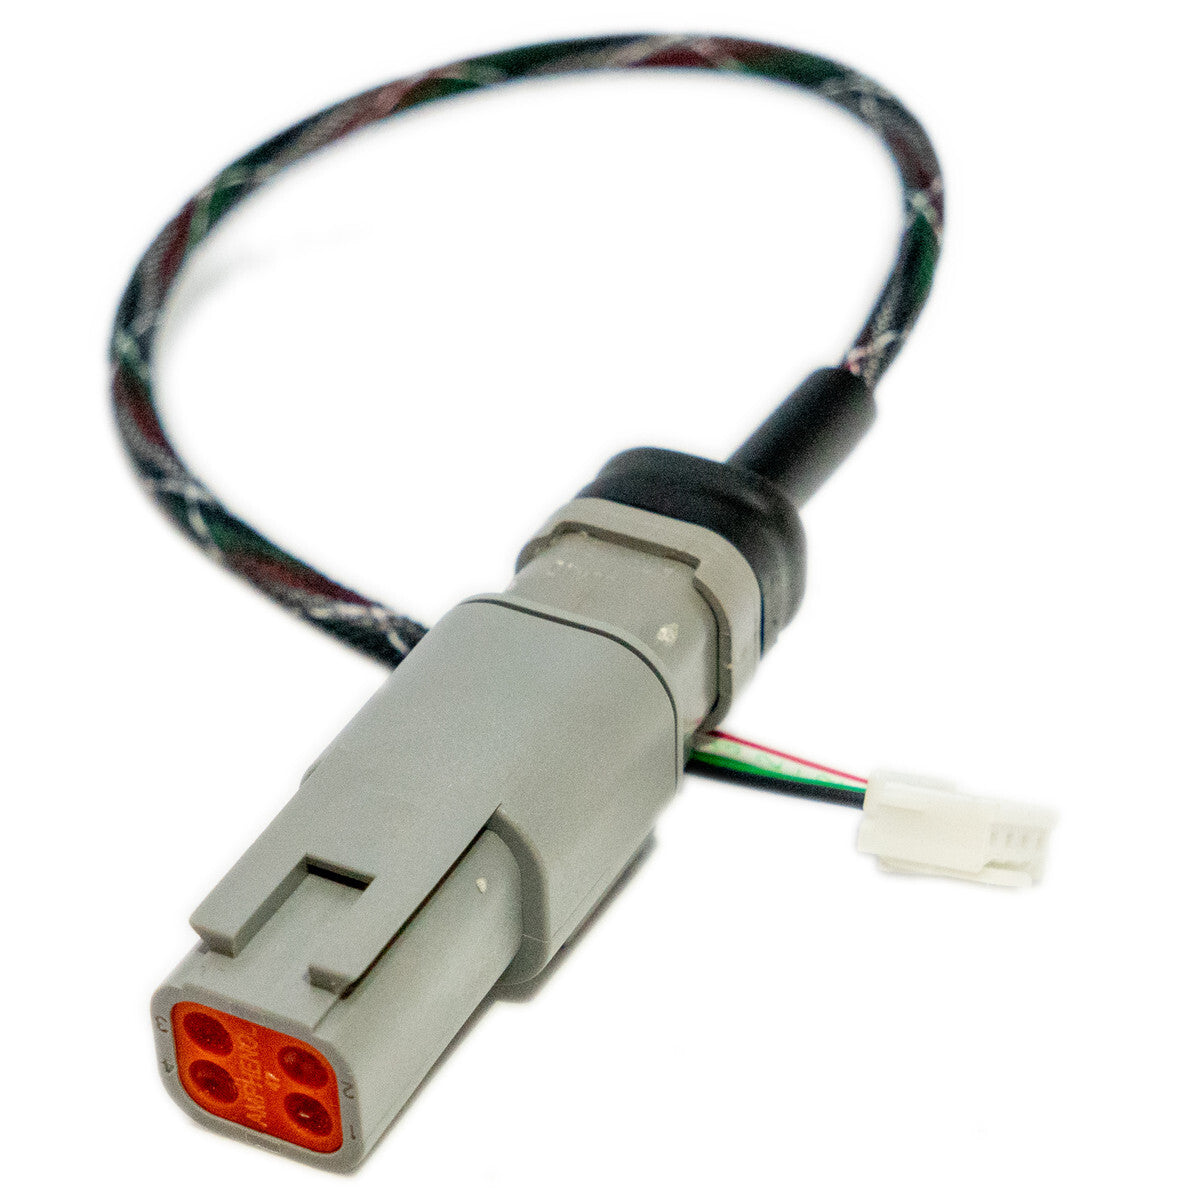 Link CAN Cable for New-Style G4X Plugin ECU's (CANJST4)